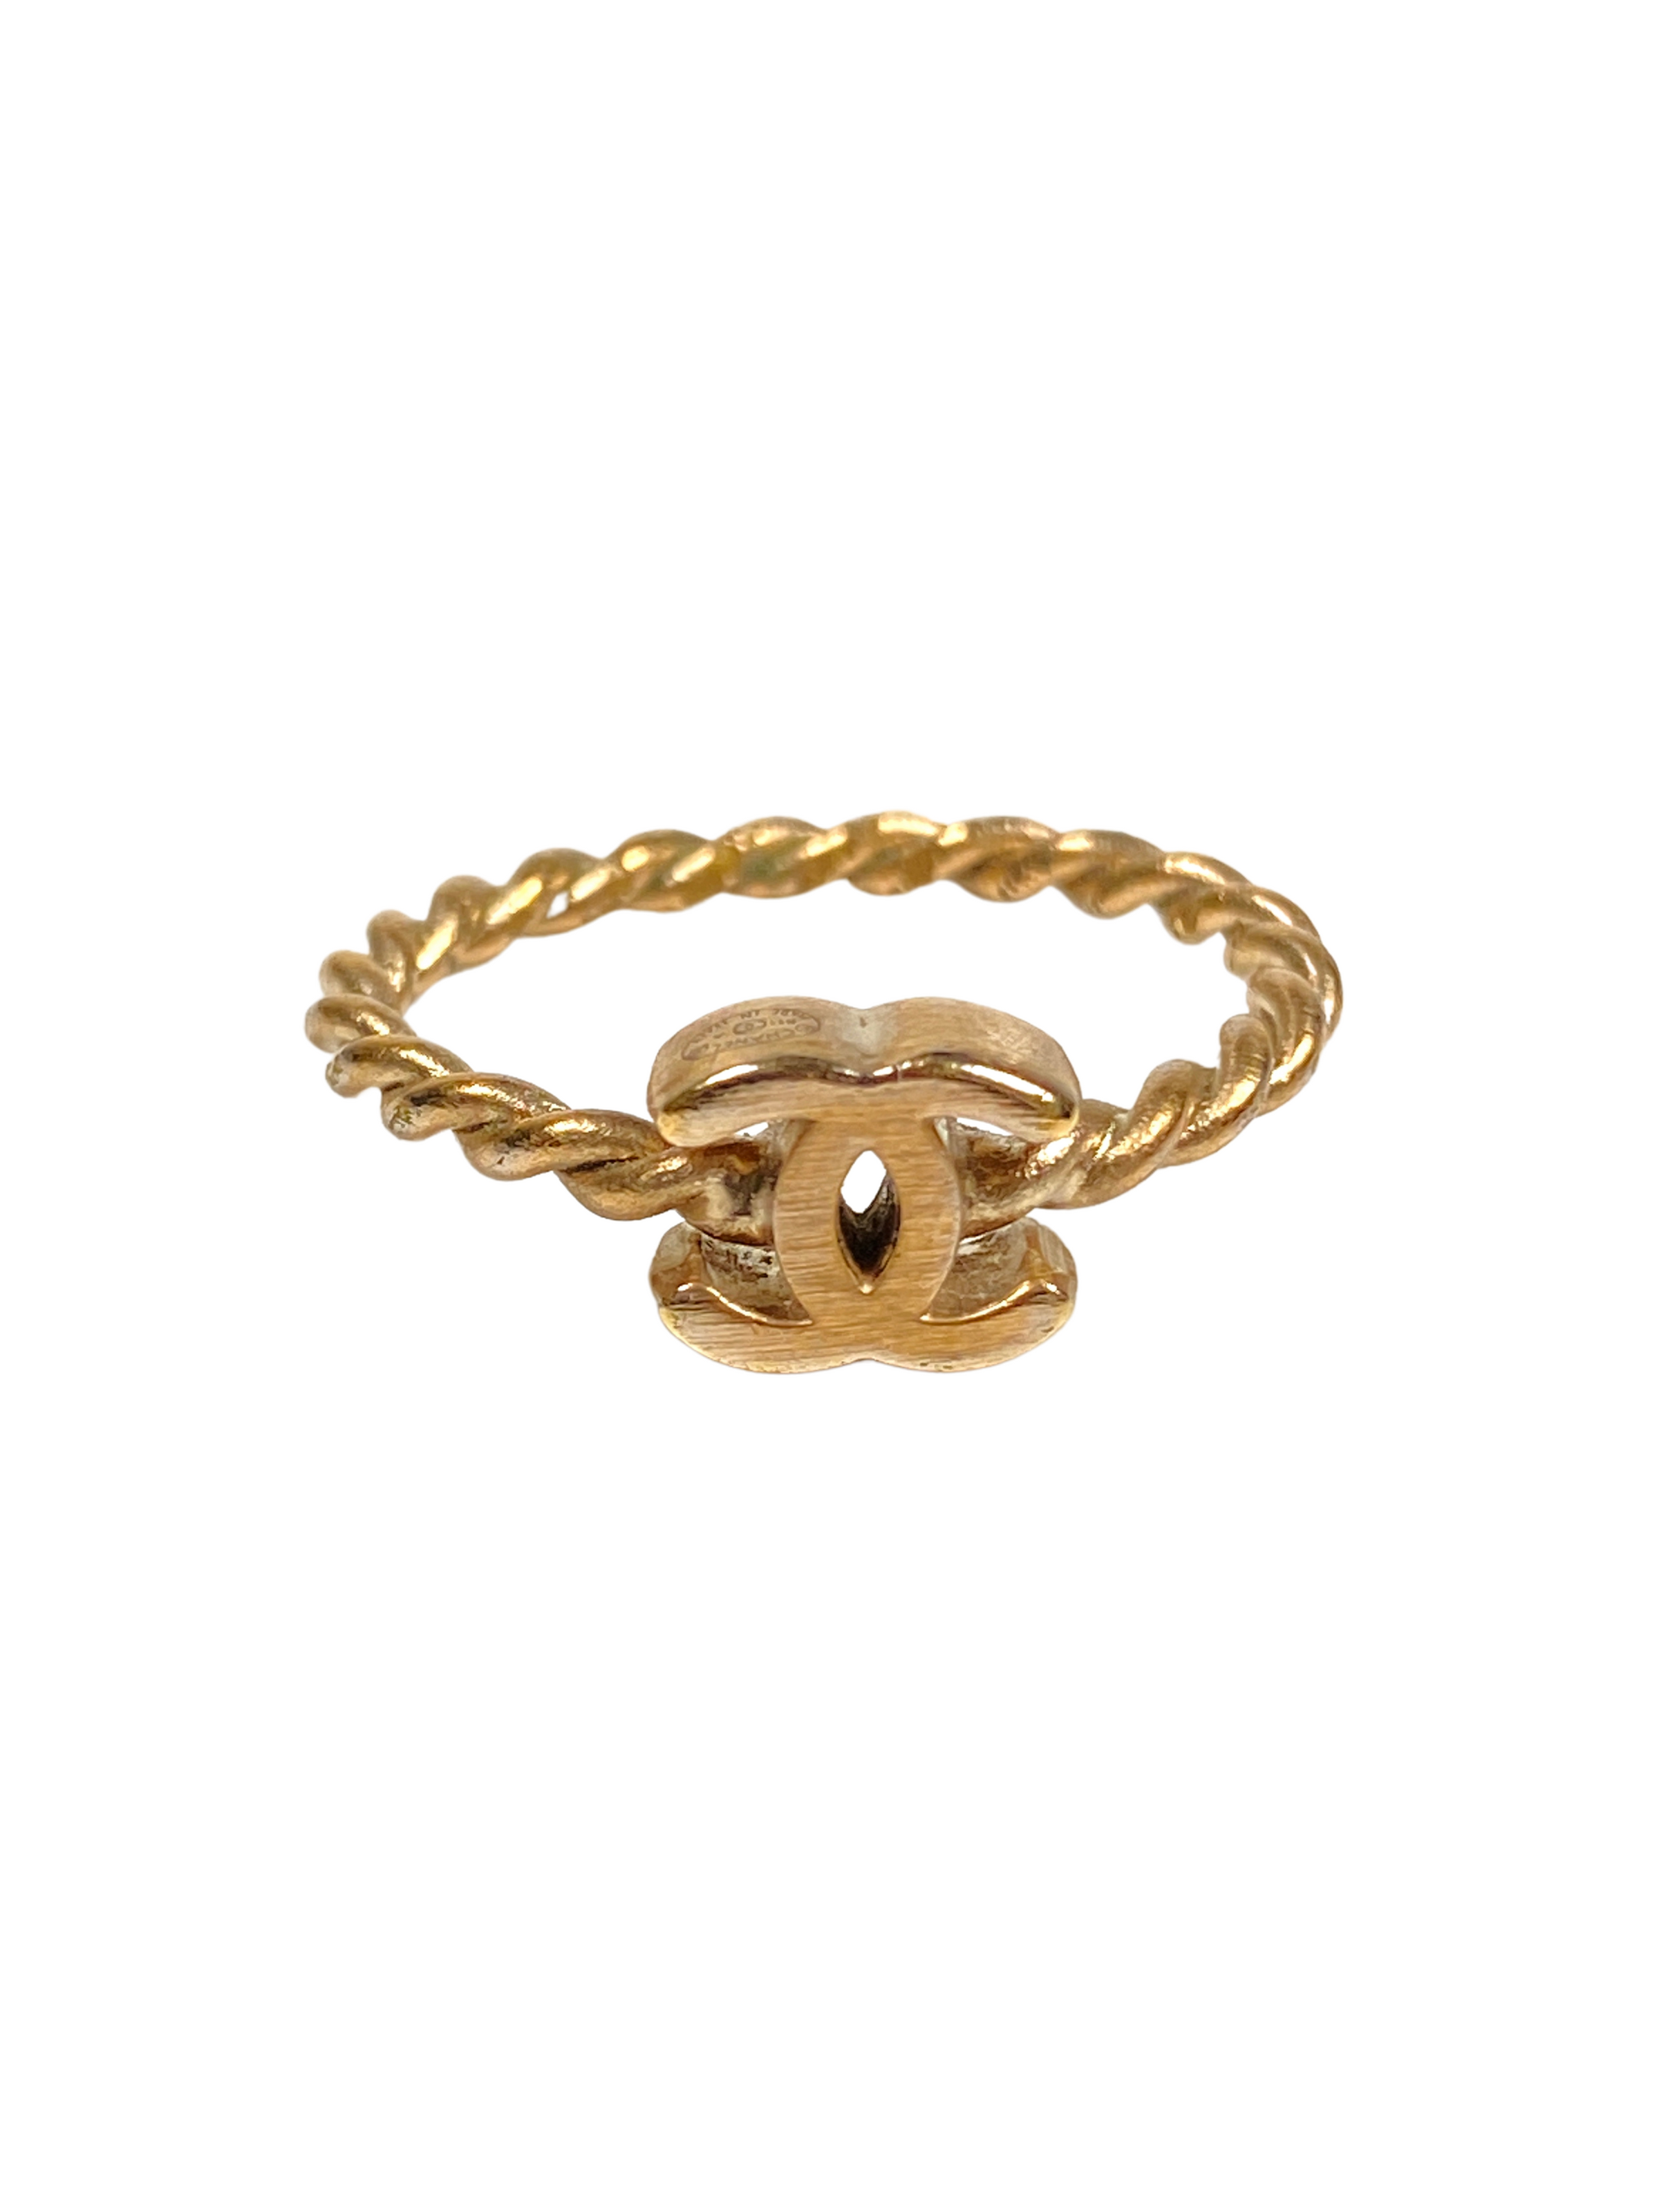 Chanel Gold CC Resin Tone Ring Size 53 Contemporary